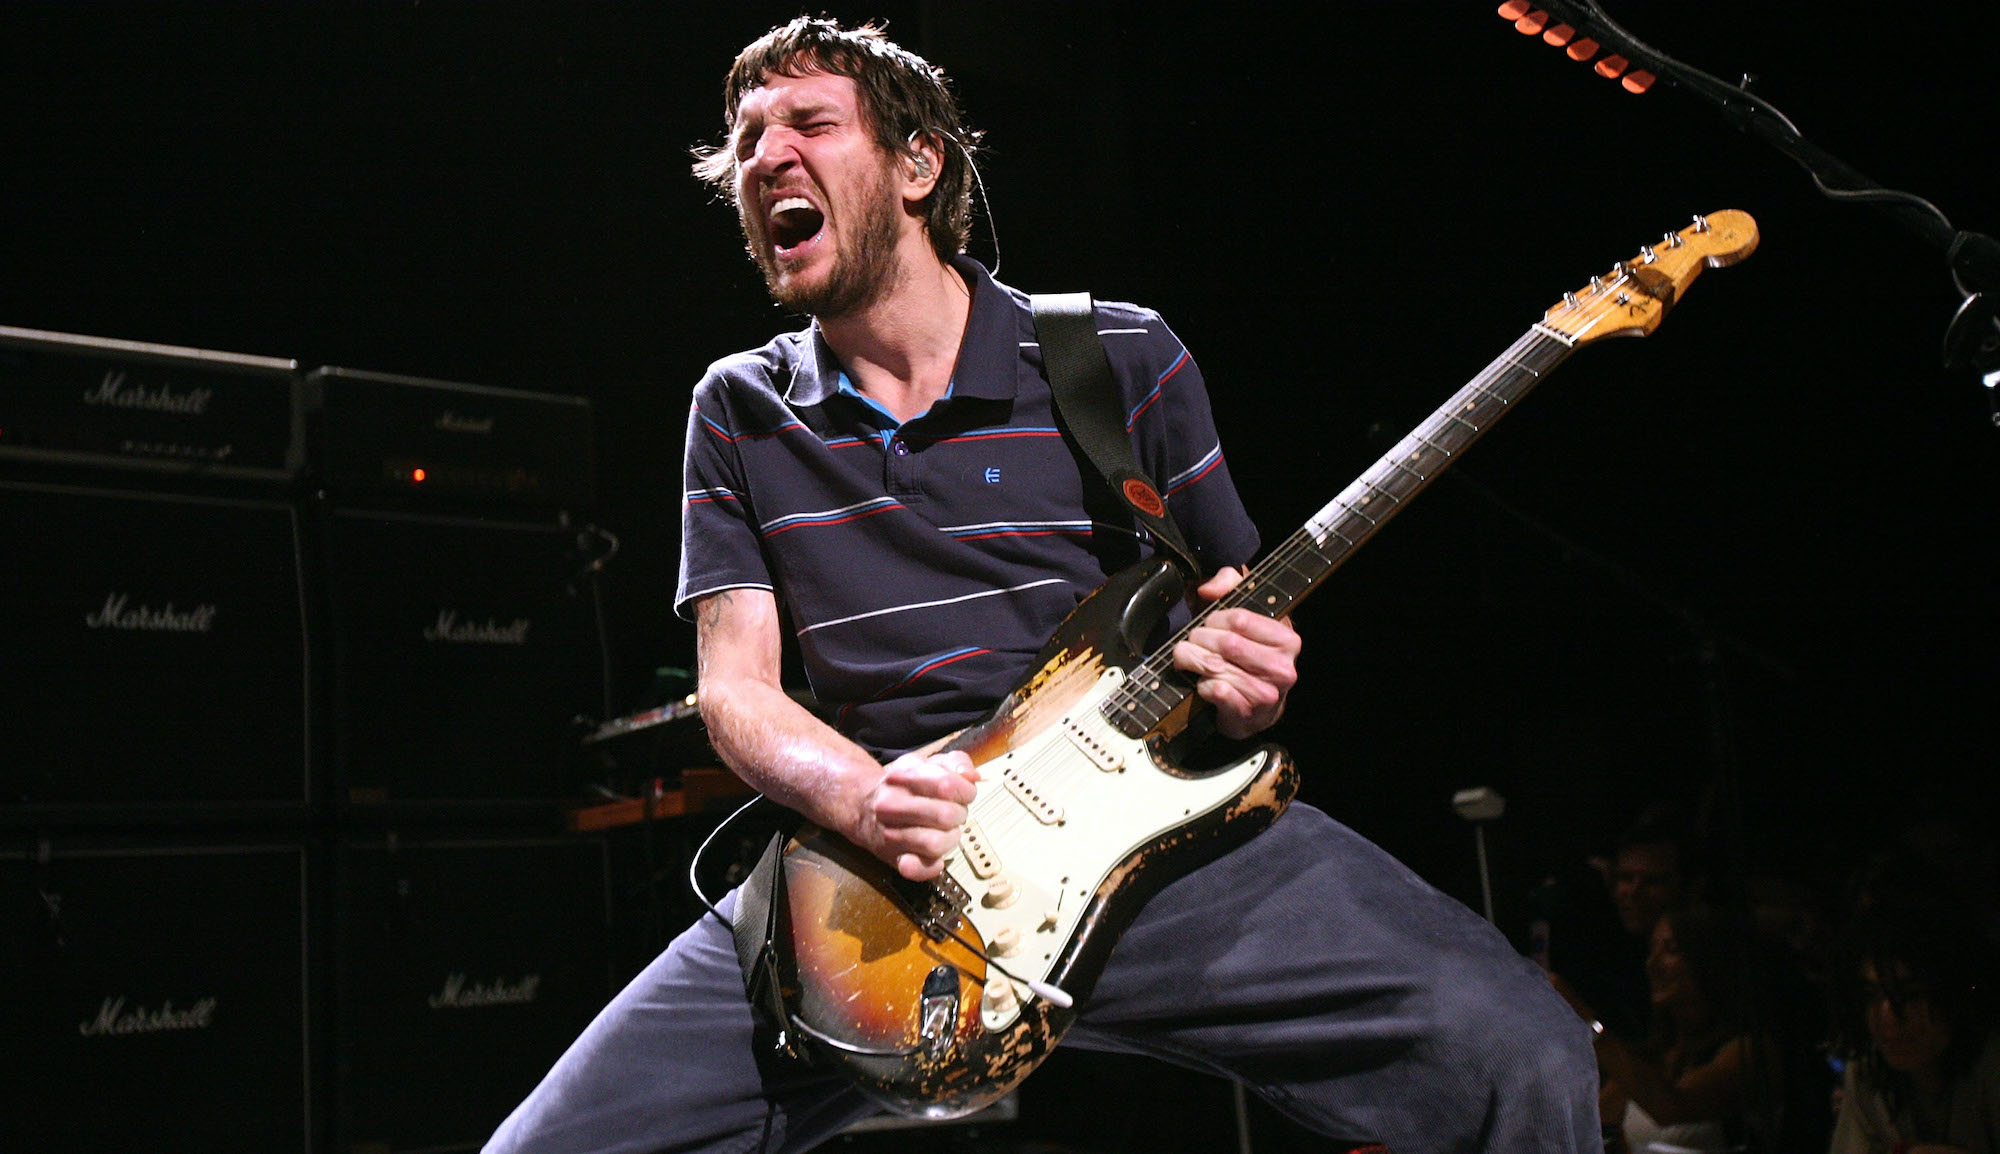 I try not to put pressure on myself and the instrument": Frusciante talks soloing, theory and the benefits of home recording 2009 GW interview | World